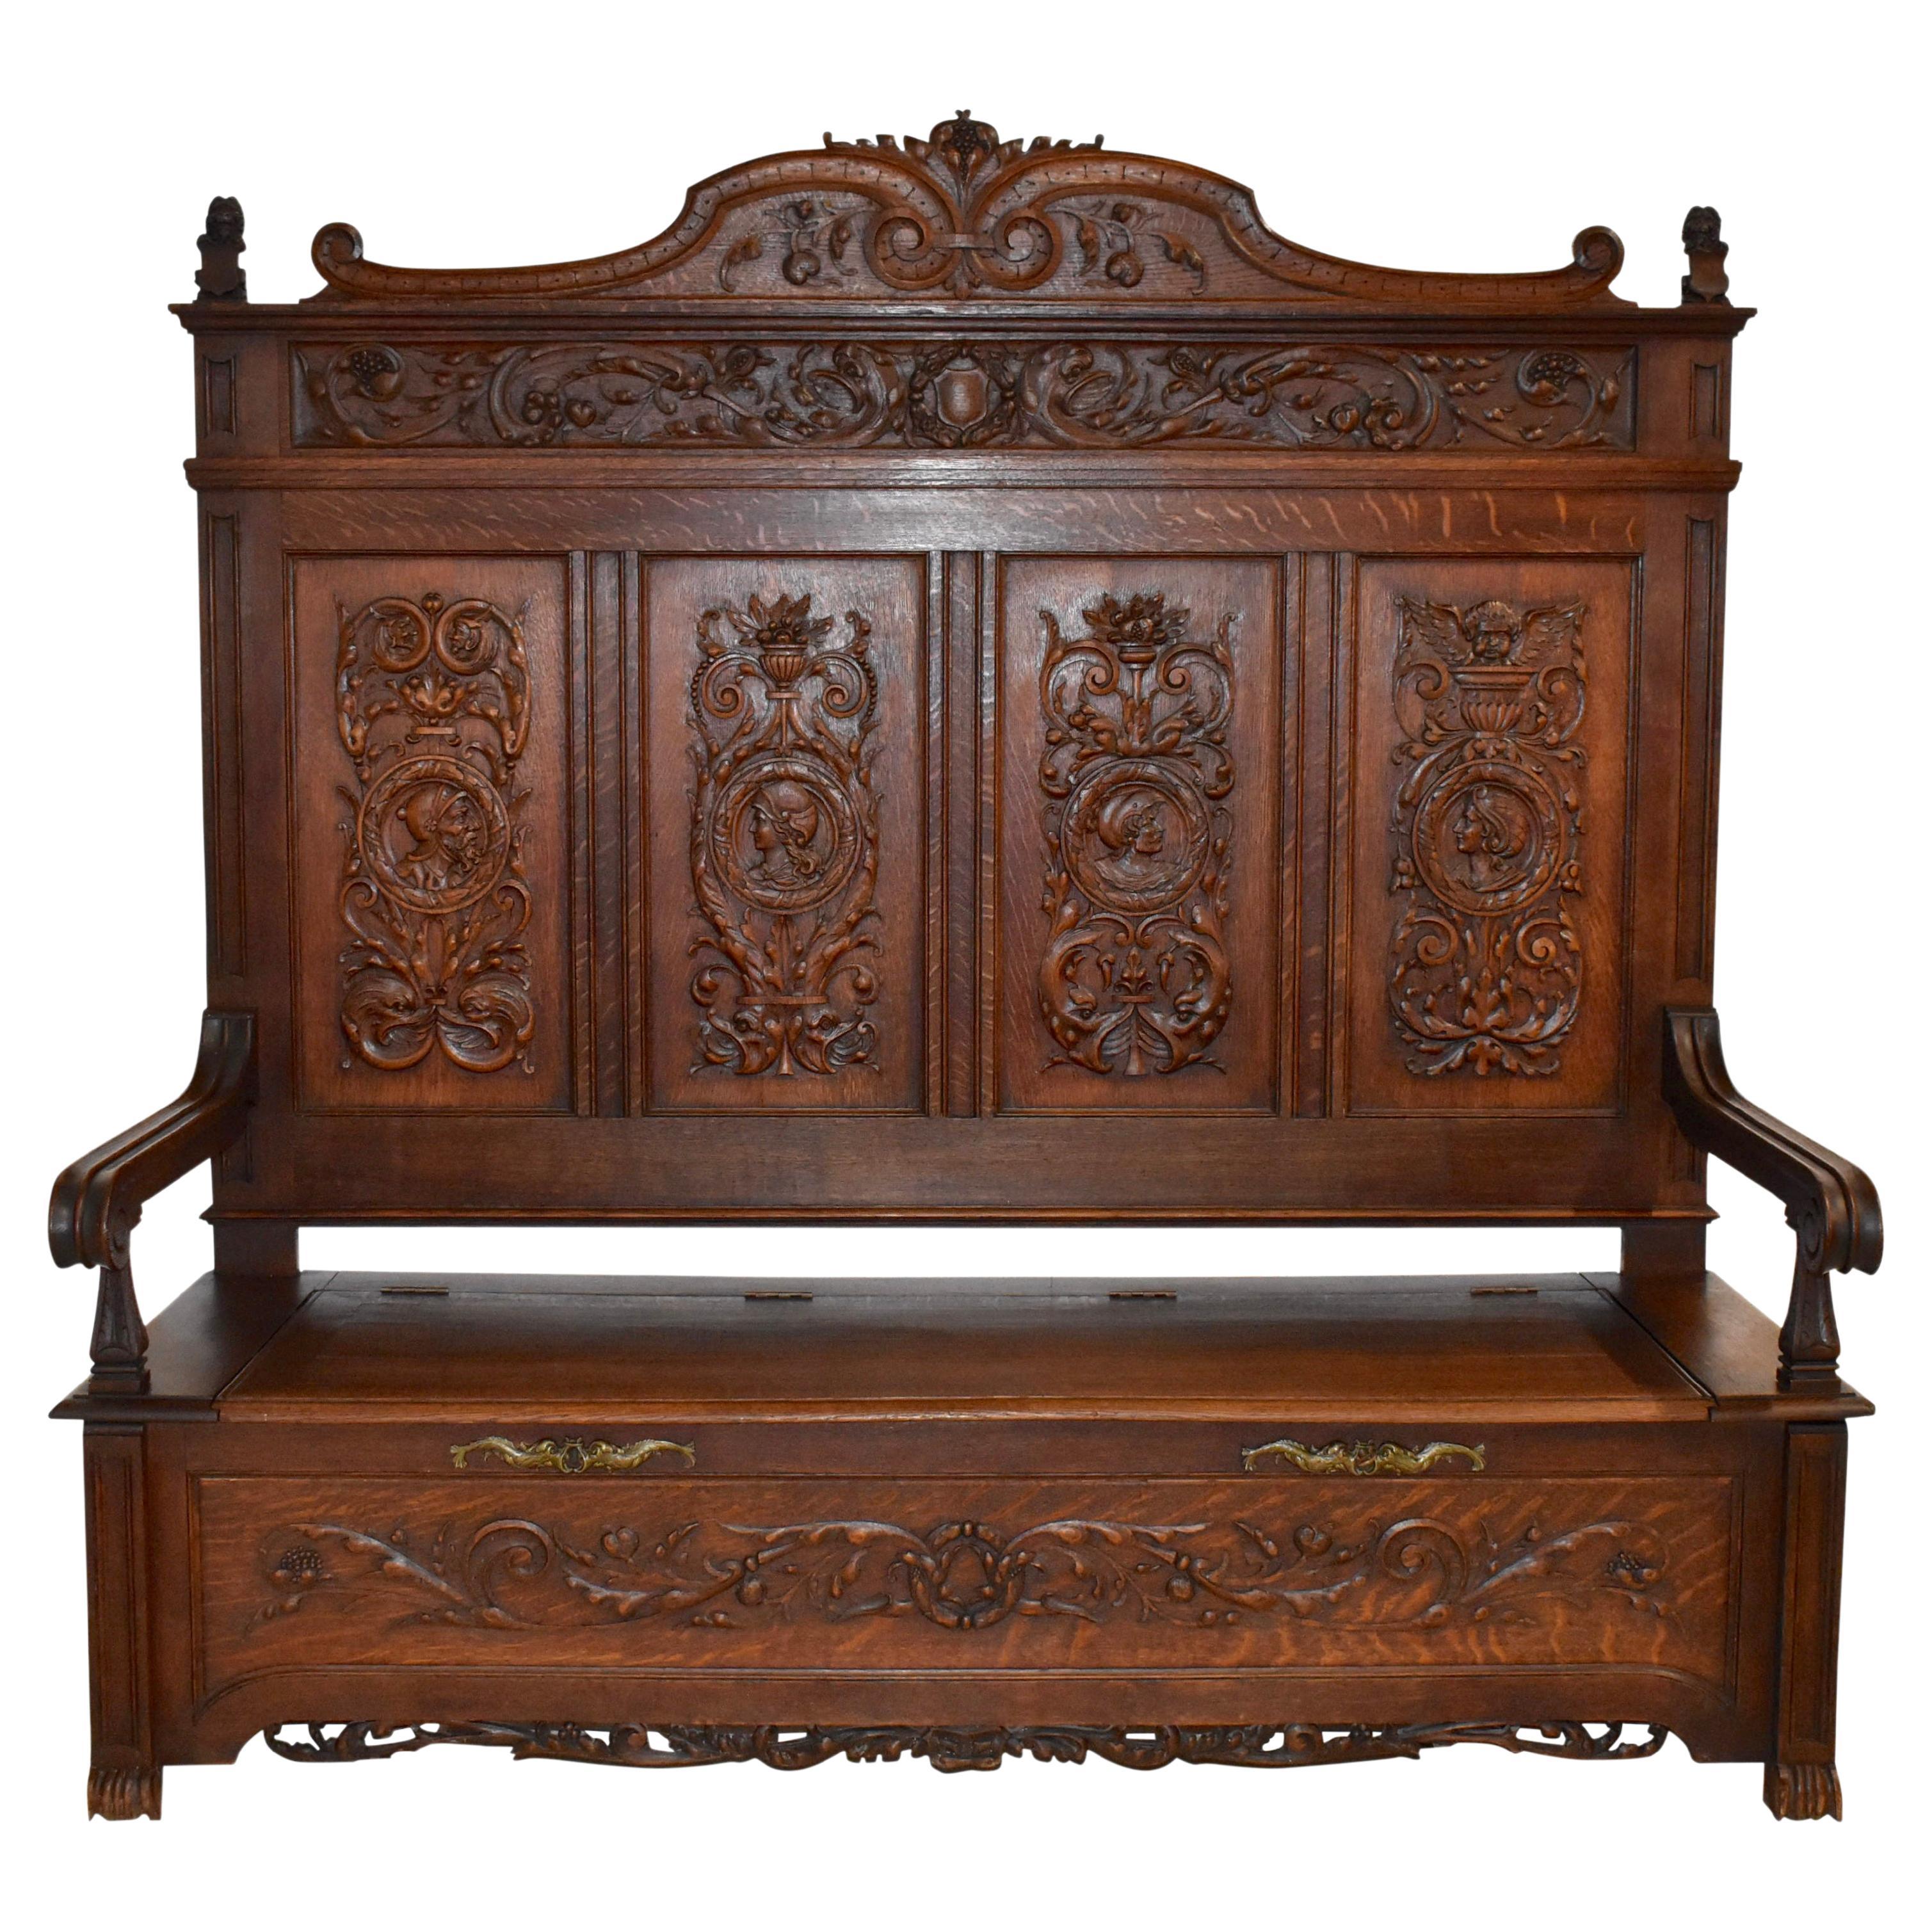 Belgian Carved Oak High Back Bench with Storage, circa 1890